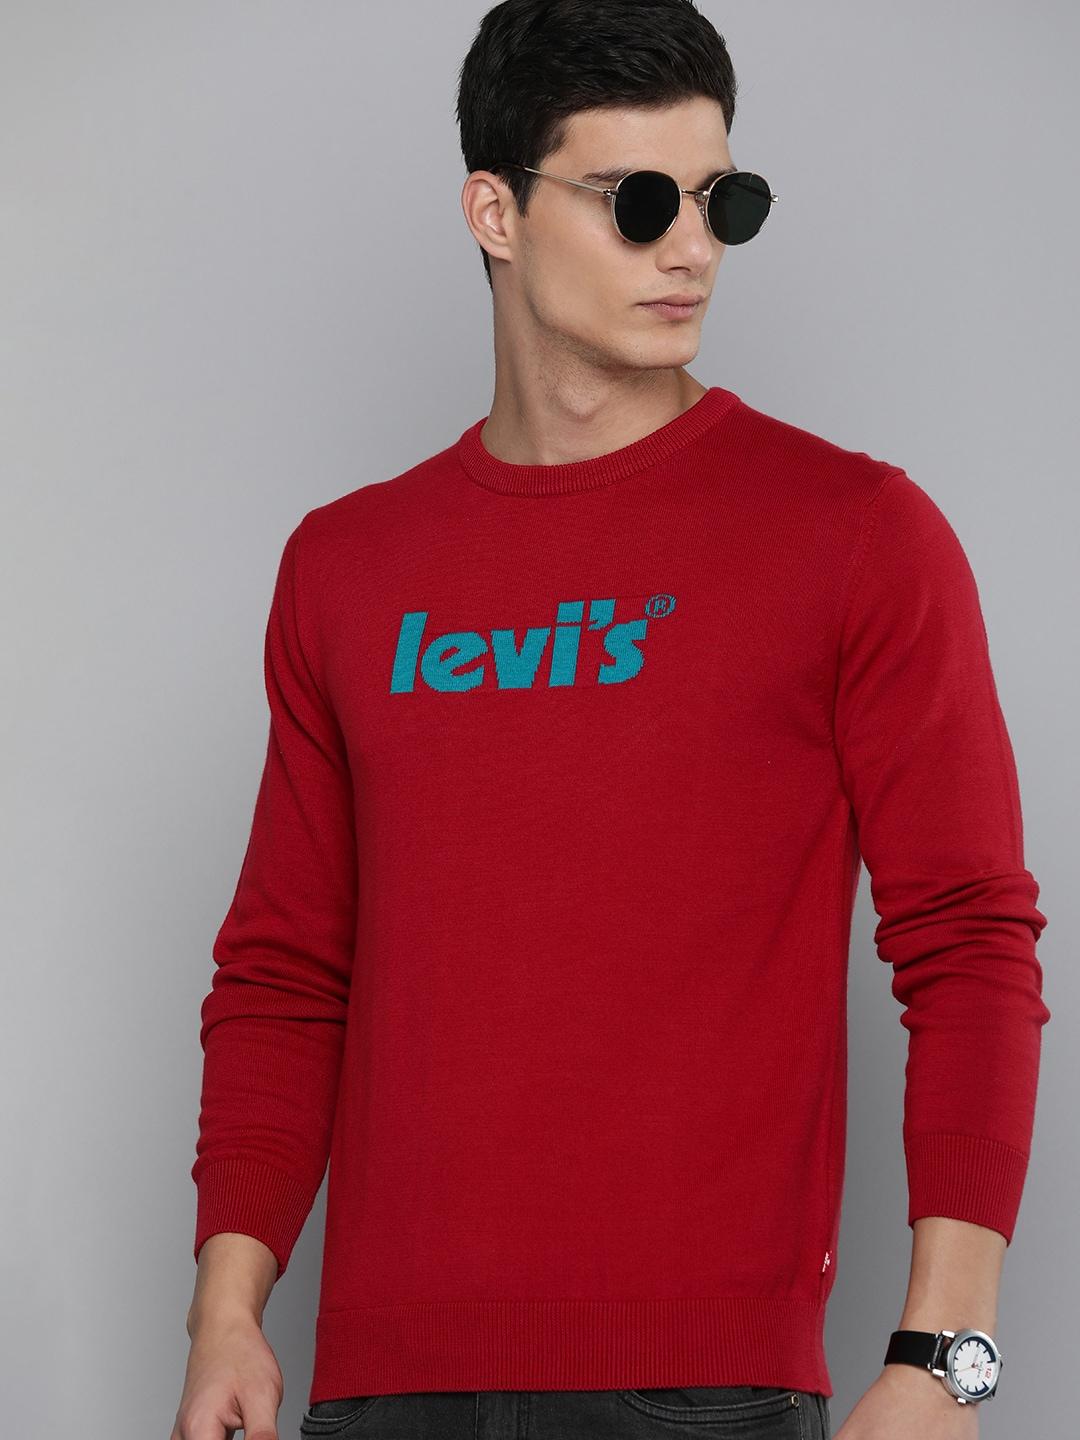 Levis Pure Cotton Brand Logo Printed Casual Pullover Sweater